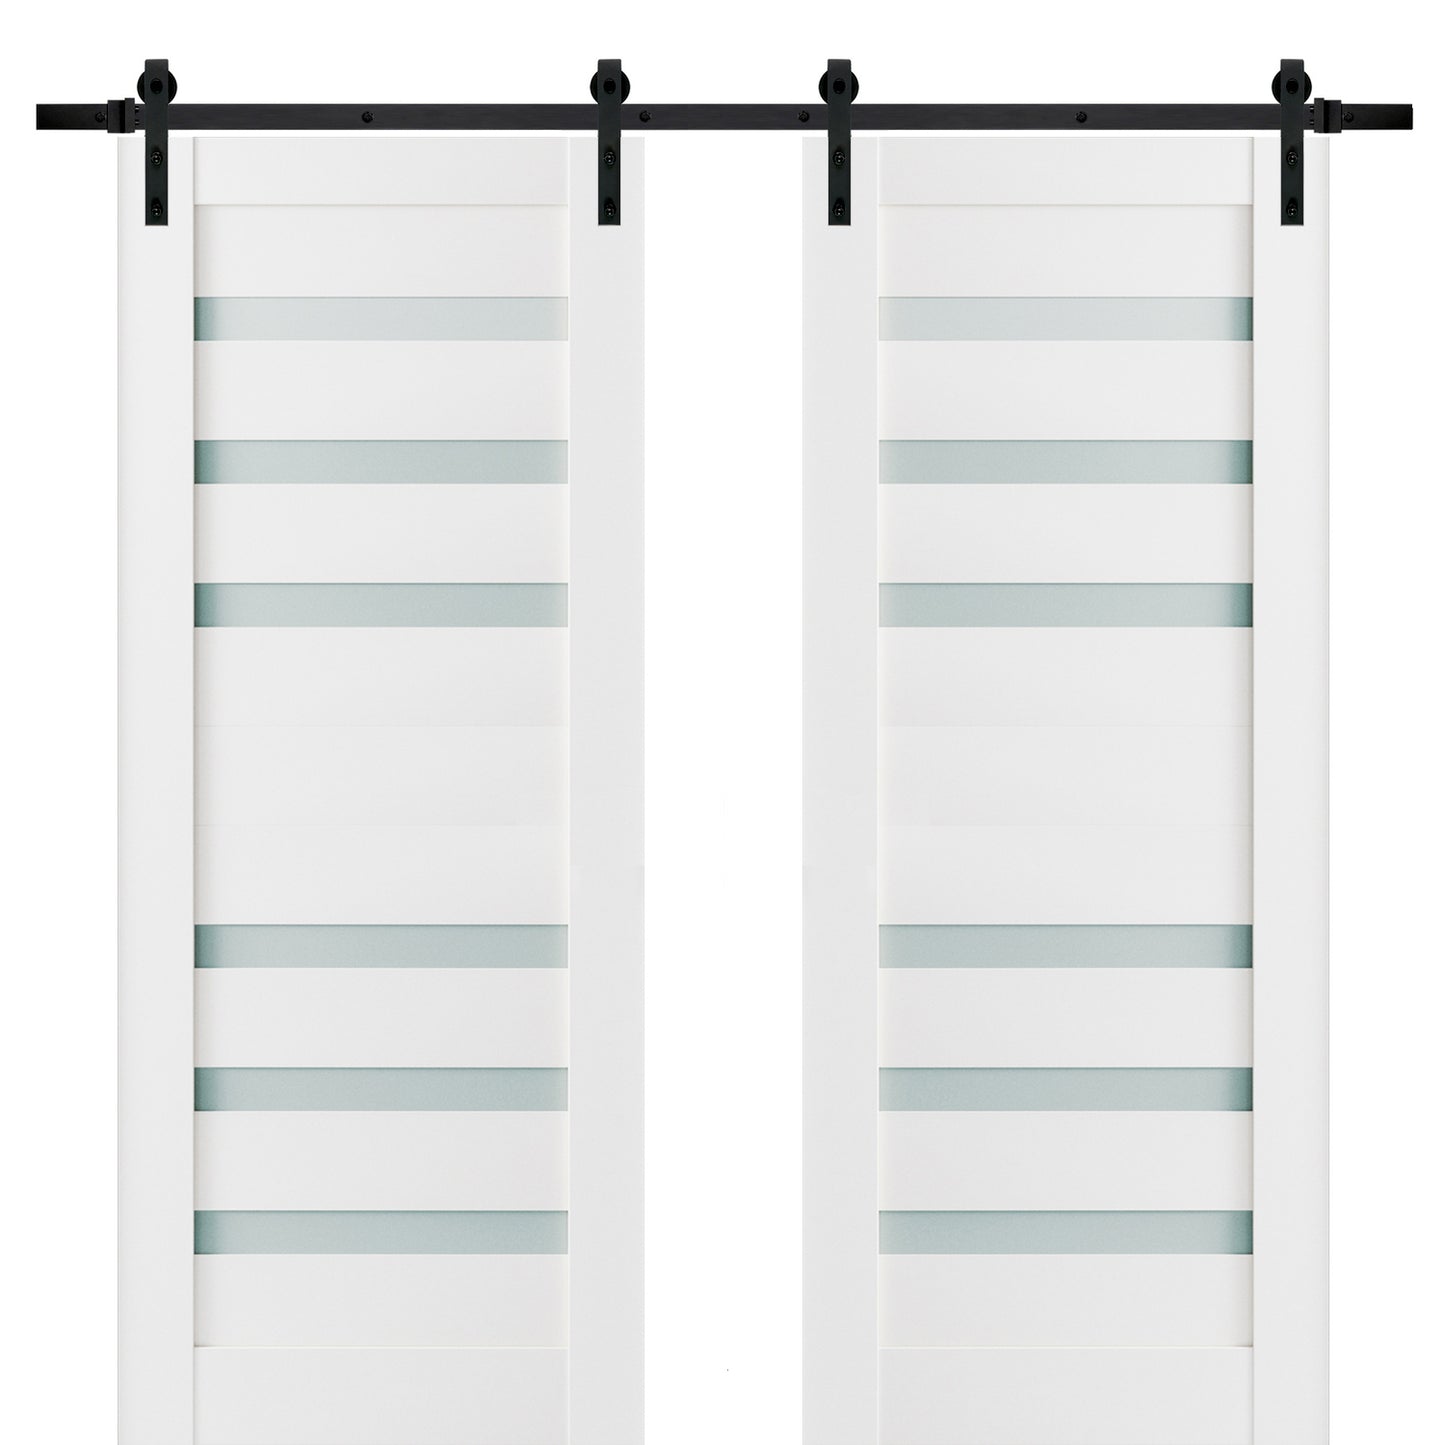 Quadro 4266 White Silk Double Barn Door with Frosted Glass and Black Rail